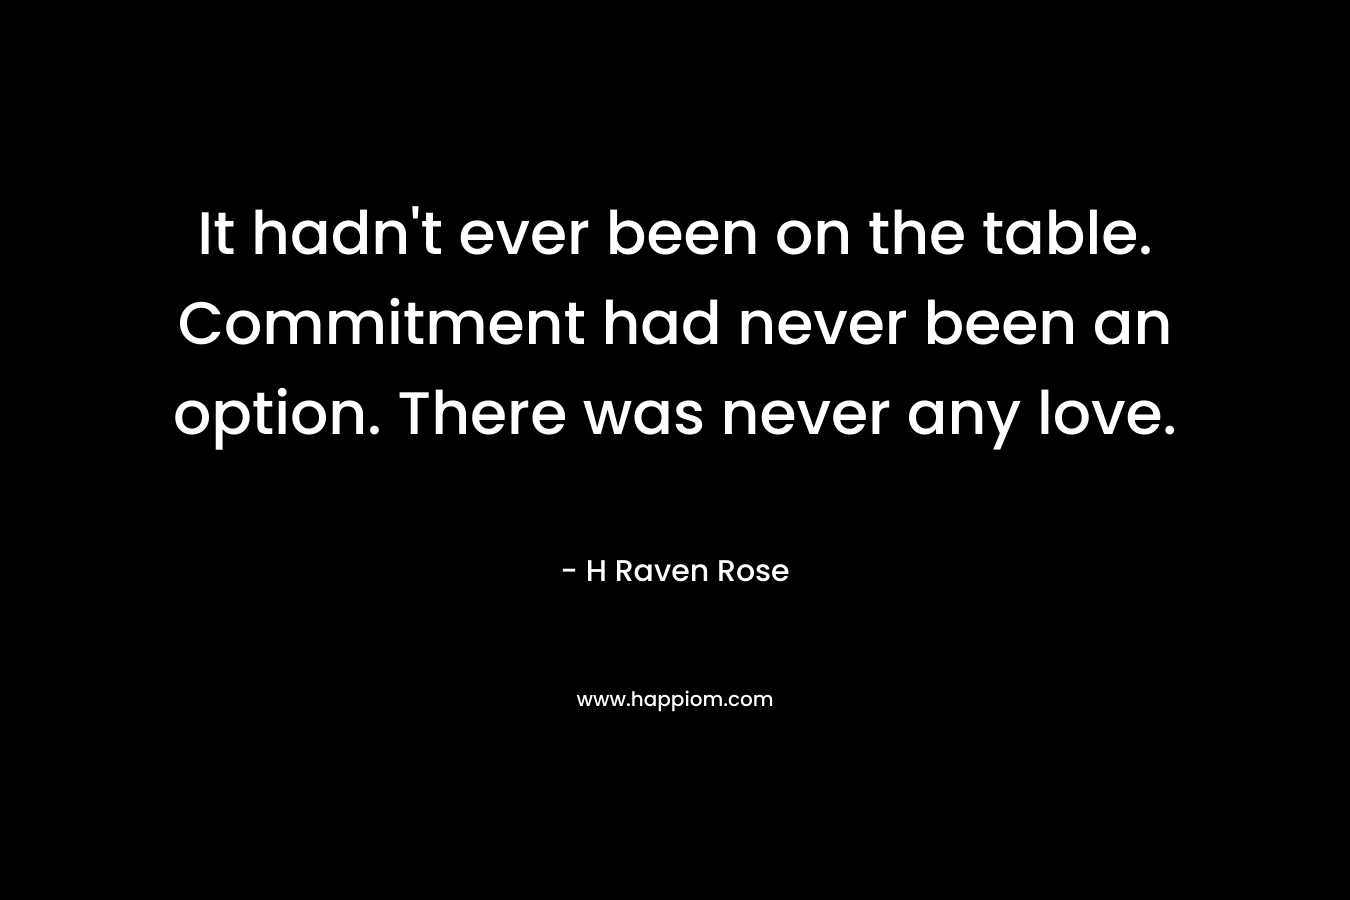 It hadn't ever been on the table. Commitment had never been an option. There was never any love.